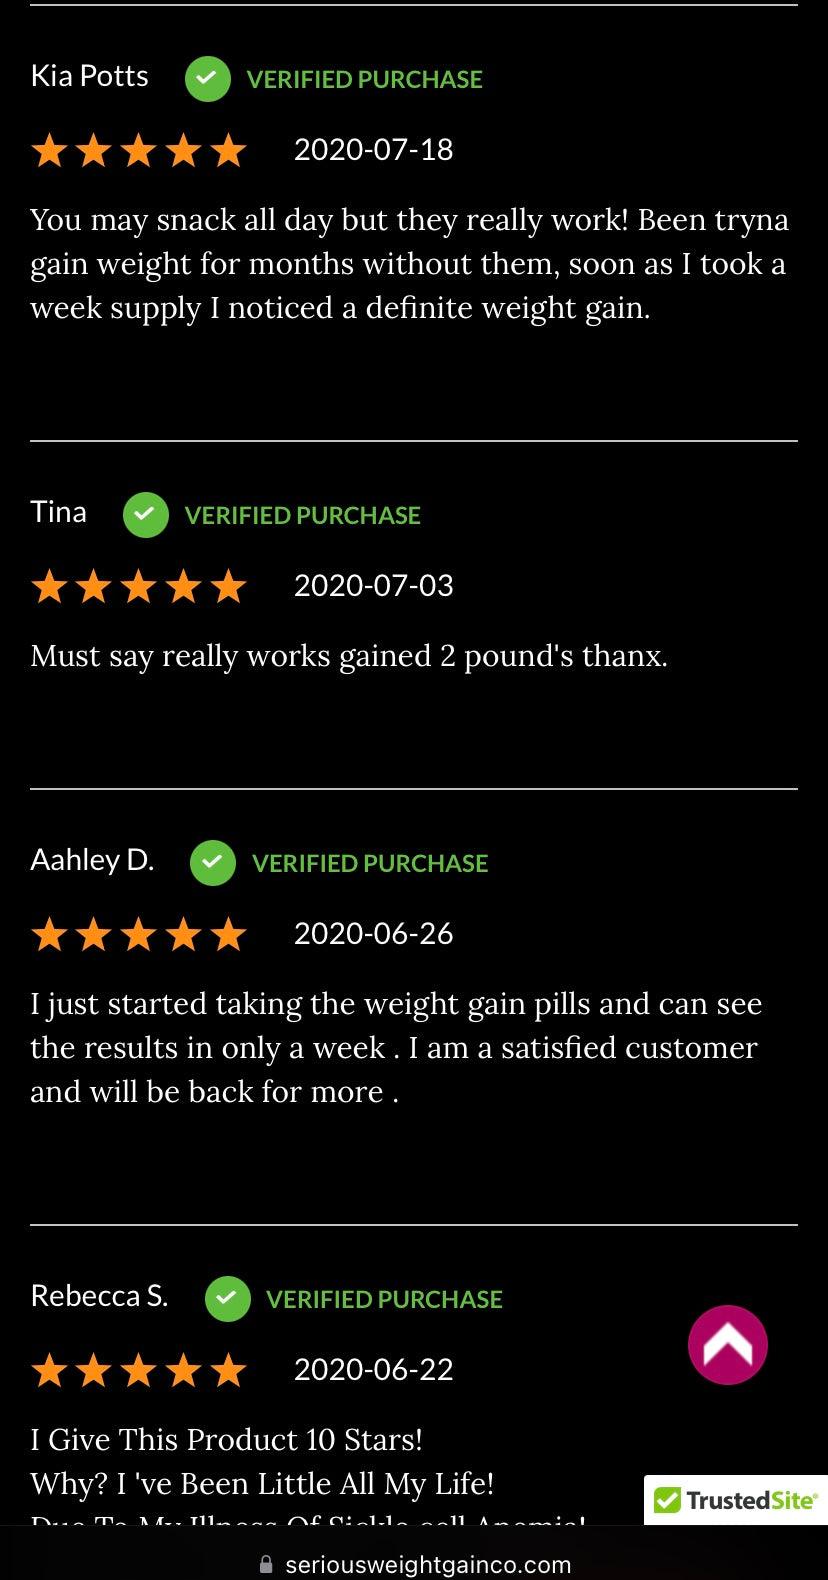 Serious Gains Extremely Fast Working Weight Gain Pills 1-3 pounds in a week - Get Thick Products